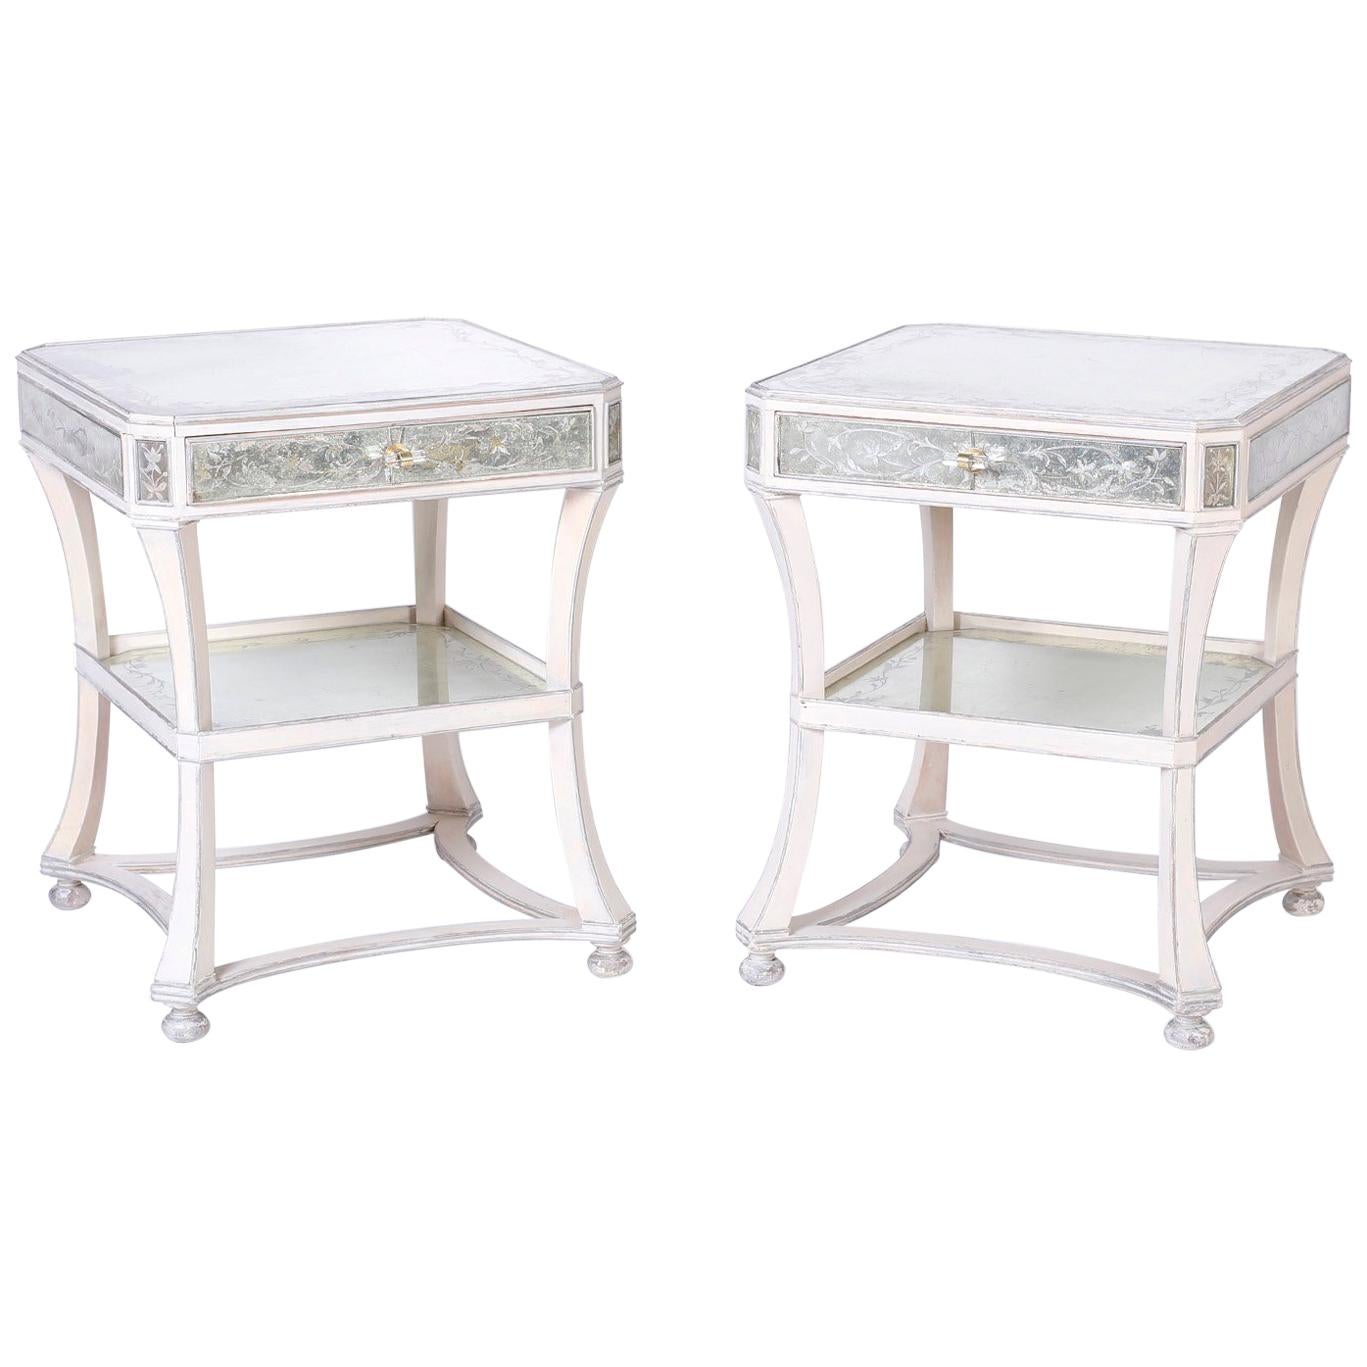 Pair of Italian Mirrored End Tables